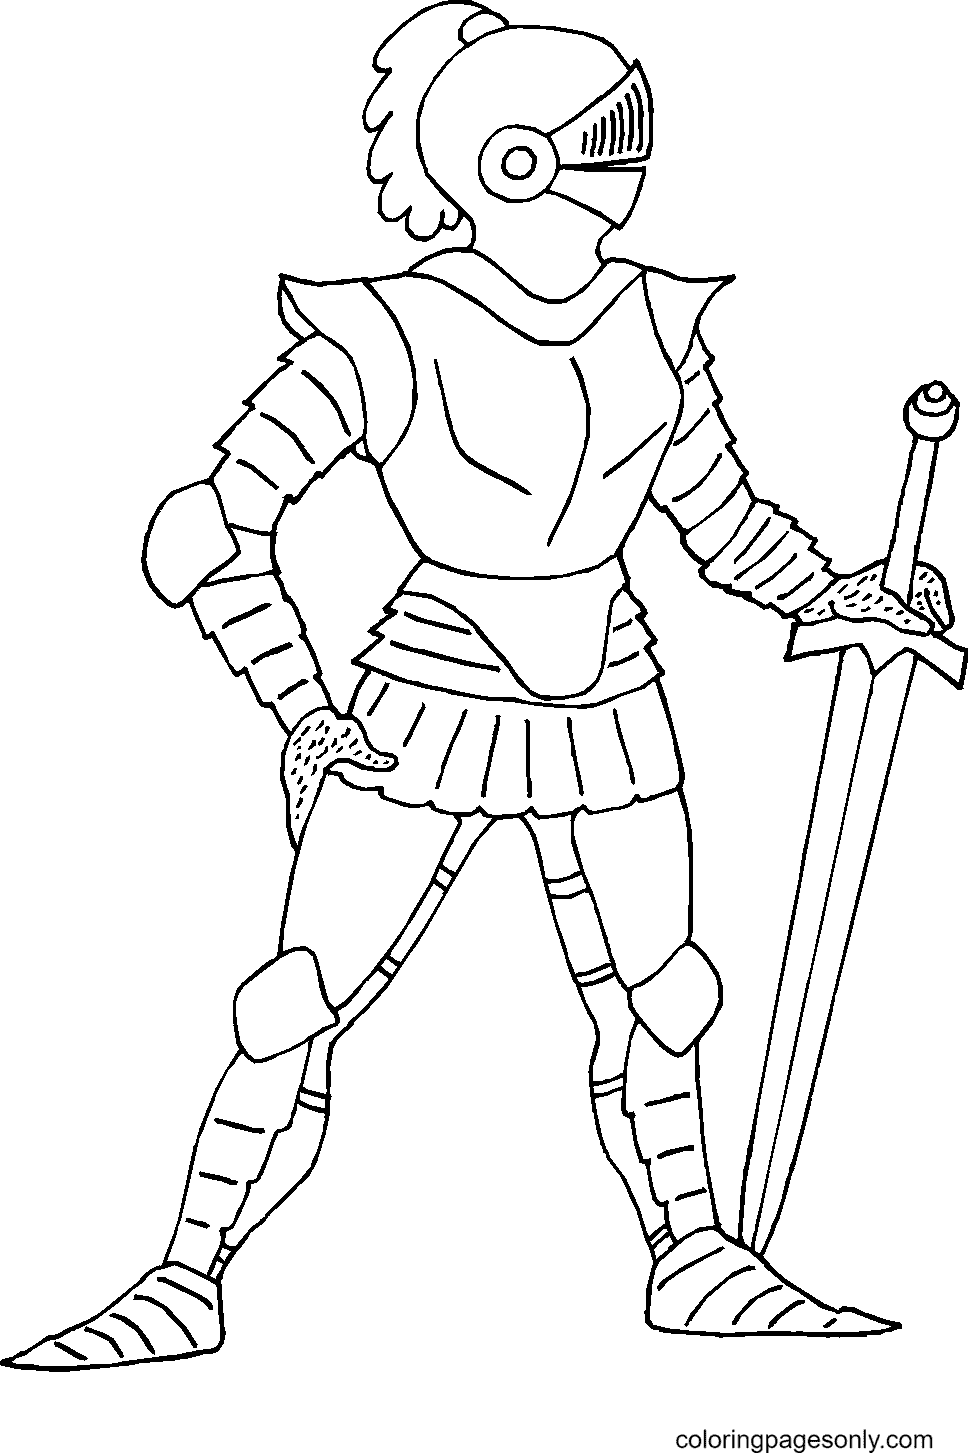 Knight with Sword Coloring Pages